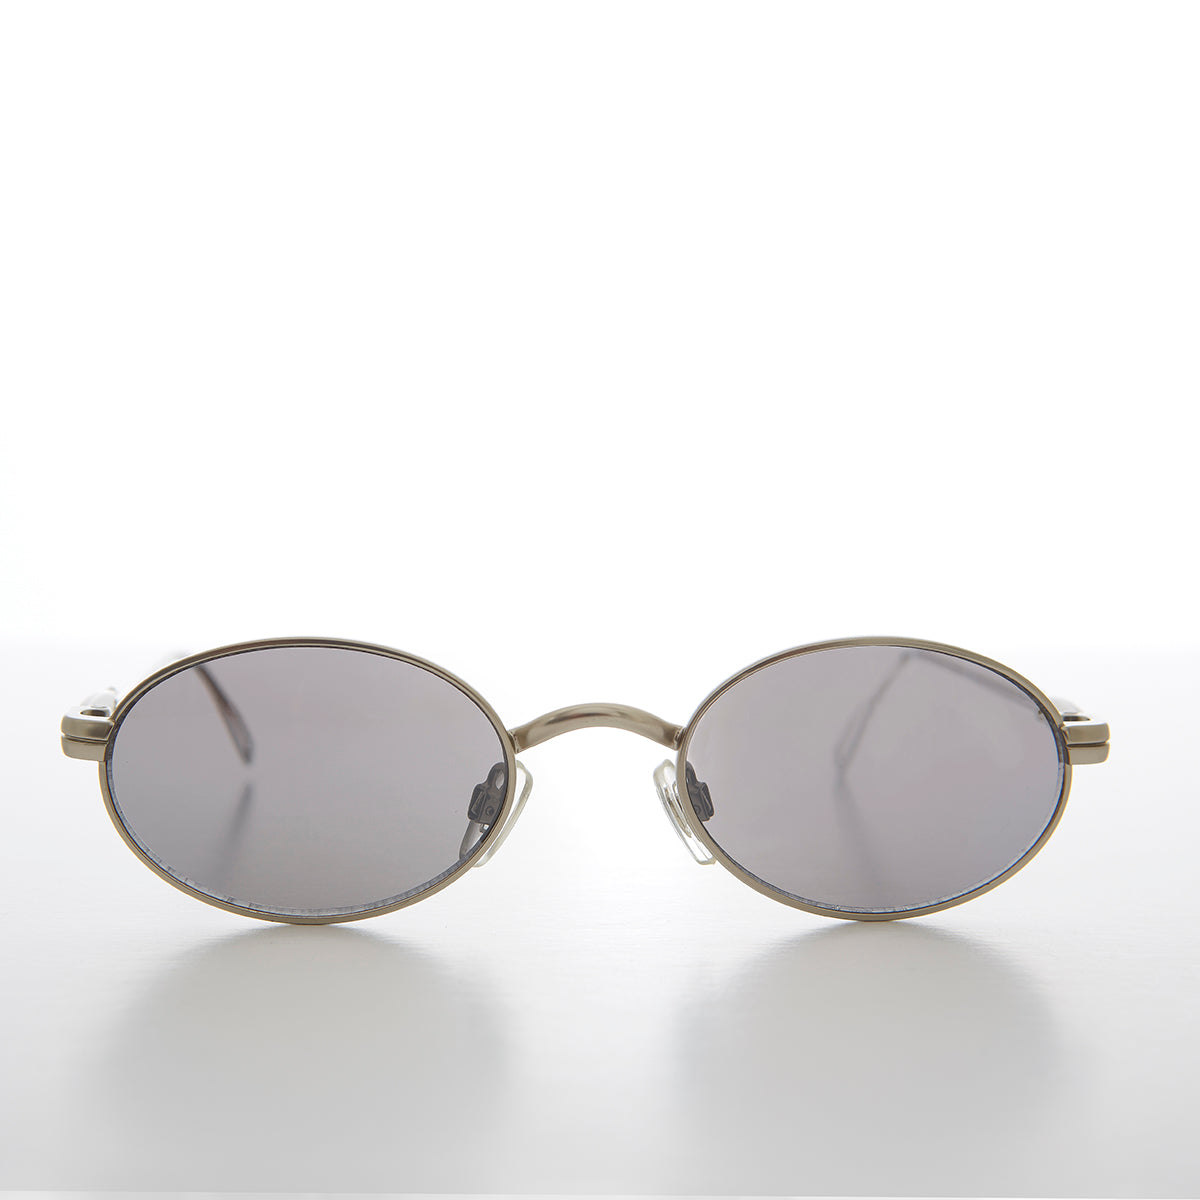 Oval 90s Vintage Sunglass with Intricate Temple